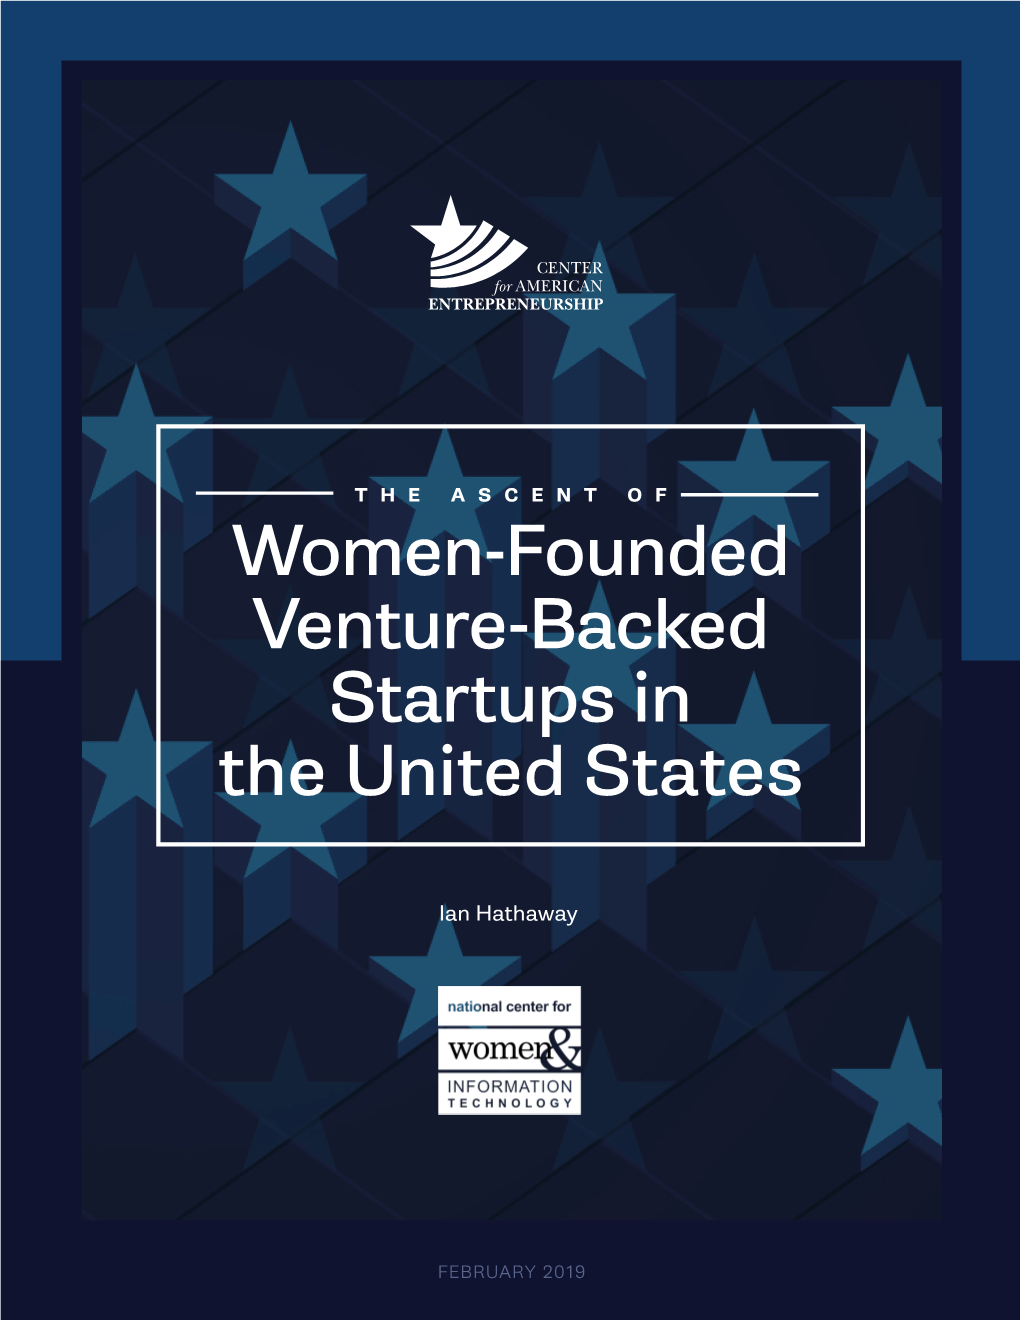 Women-Founded Venture-Backed Startups in the United States